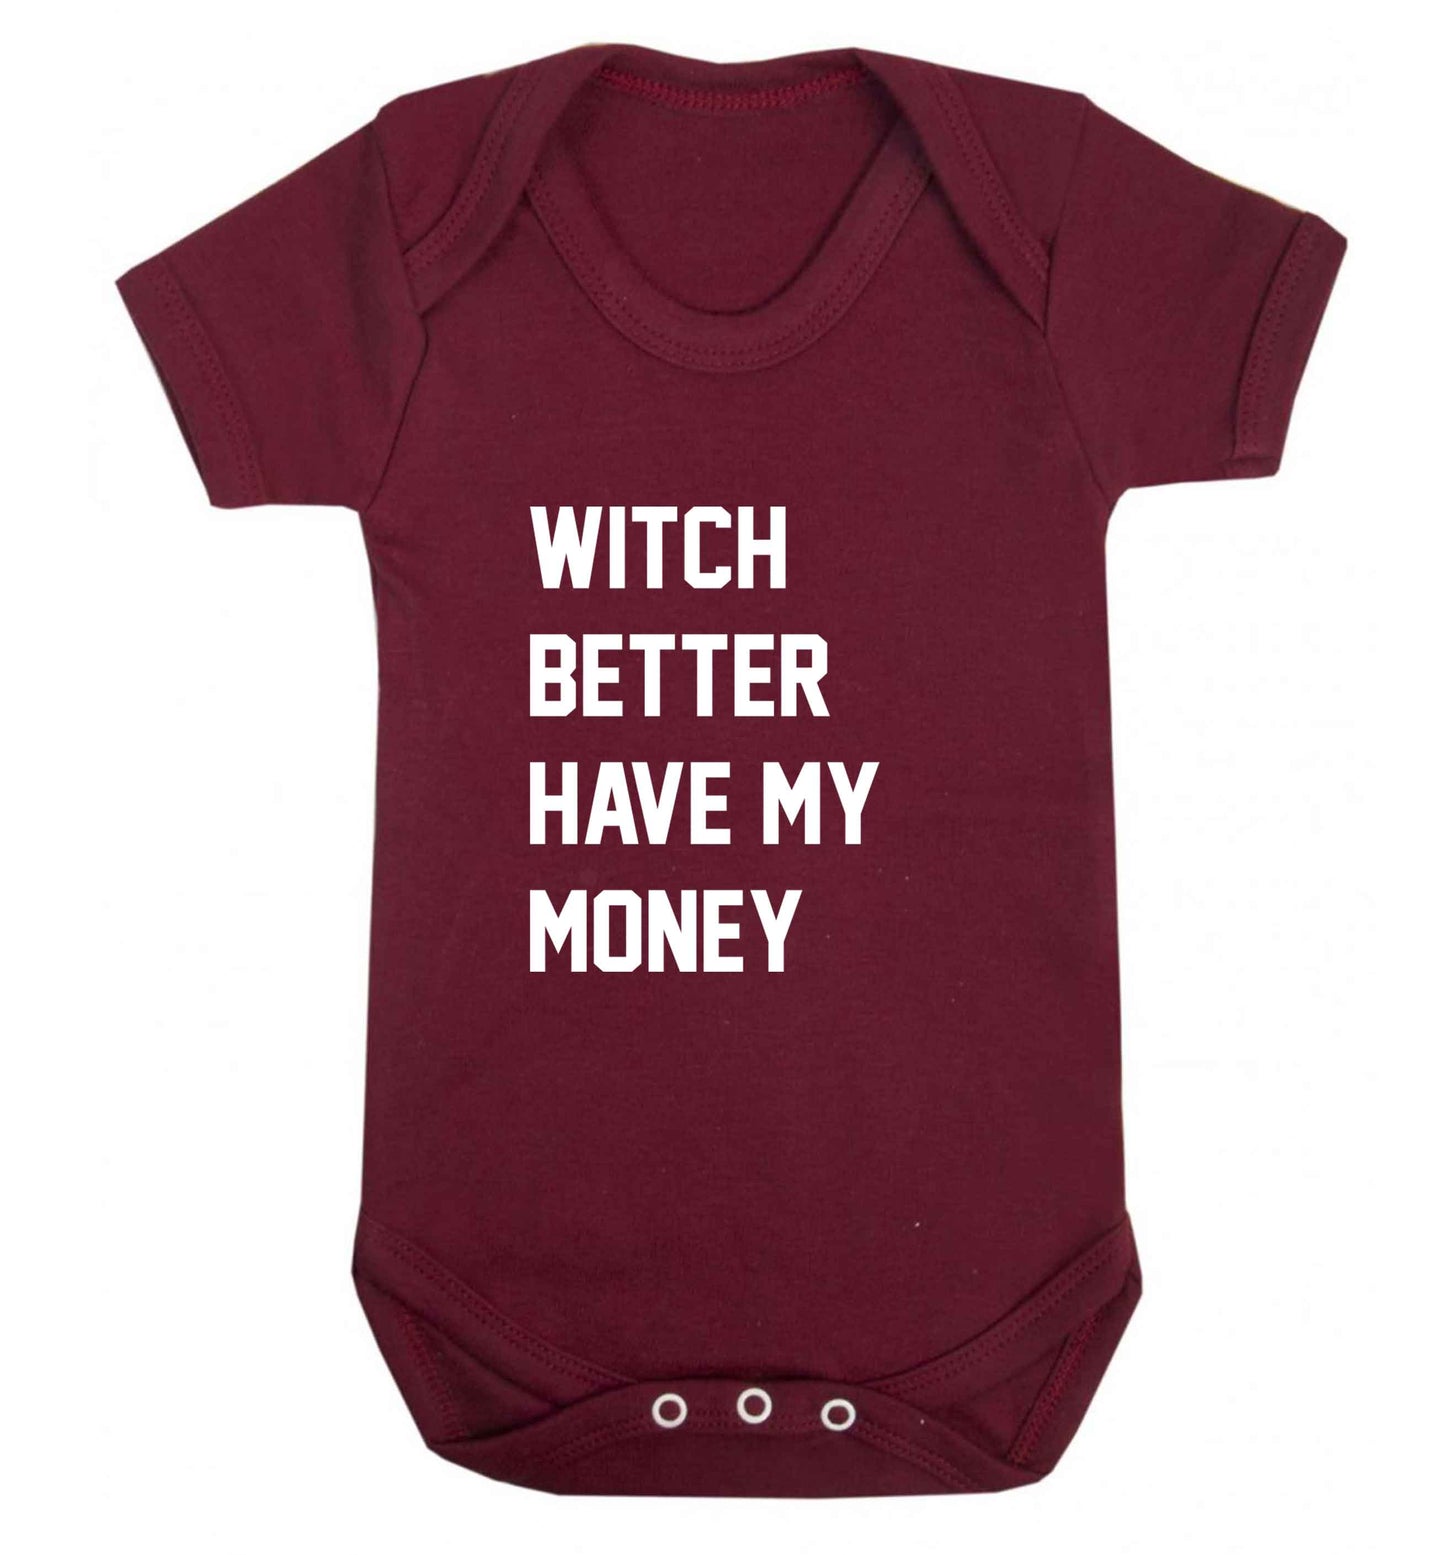 Witch better have my money baby vest maroon 18-24 months